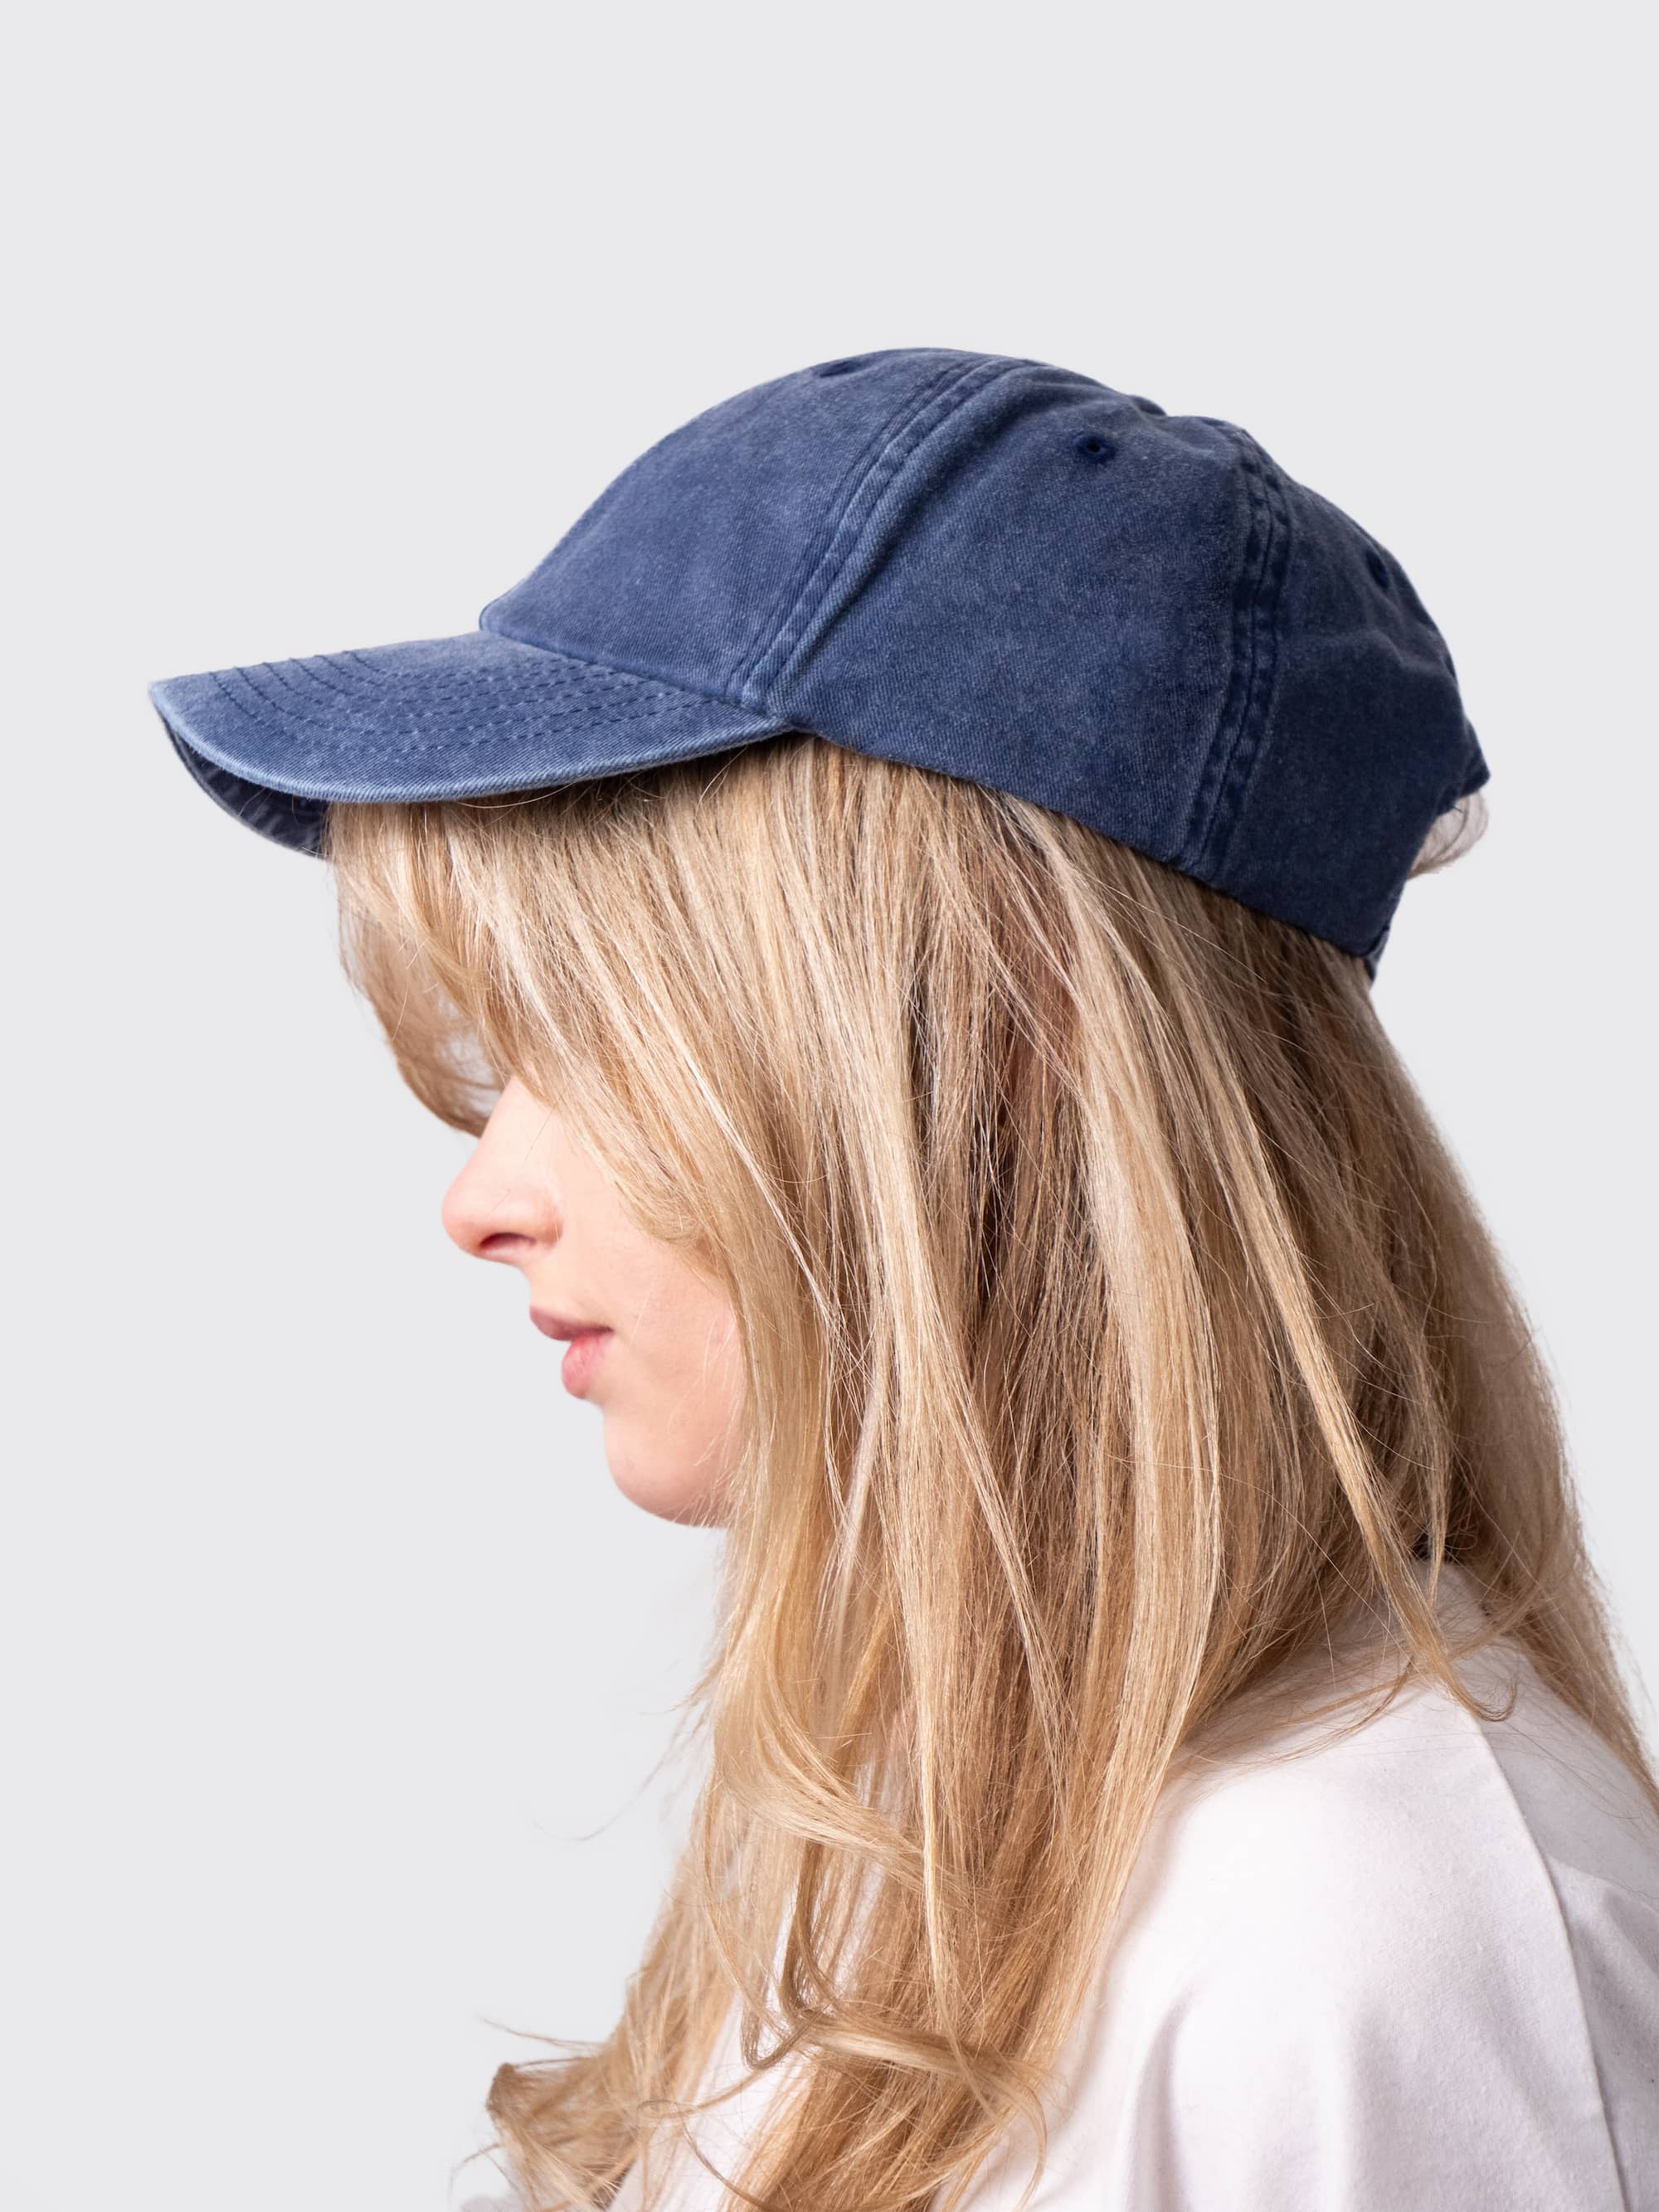 Denim vintage cap, with embroidered King's College crest